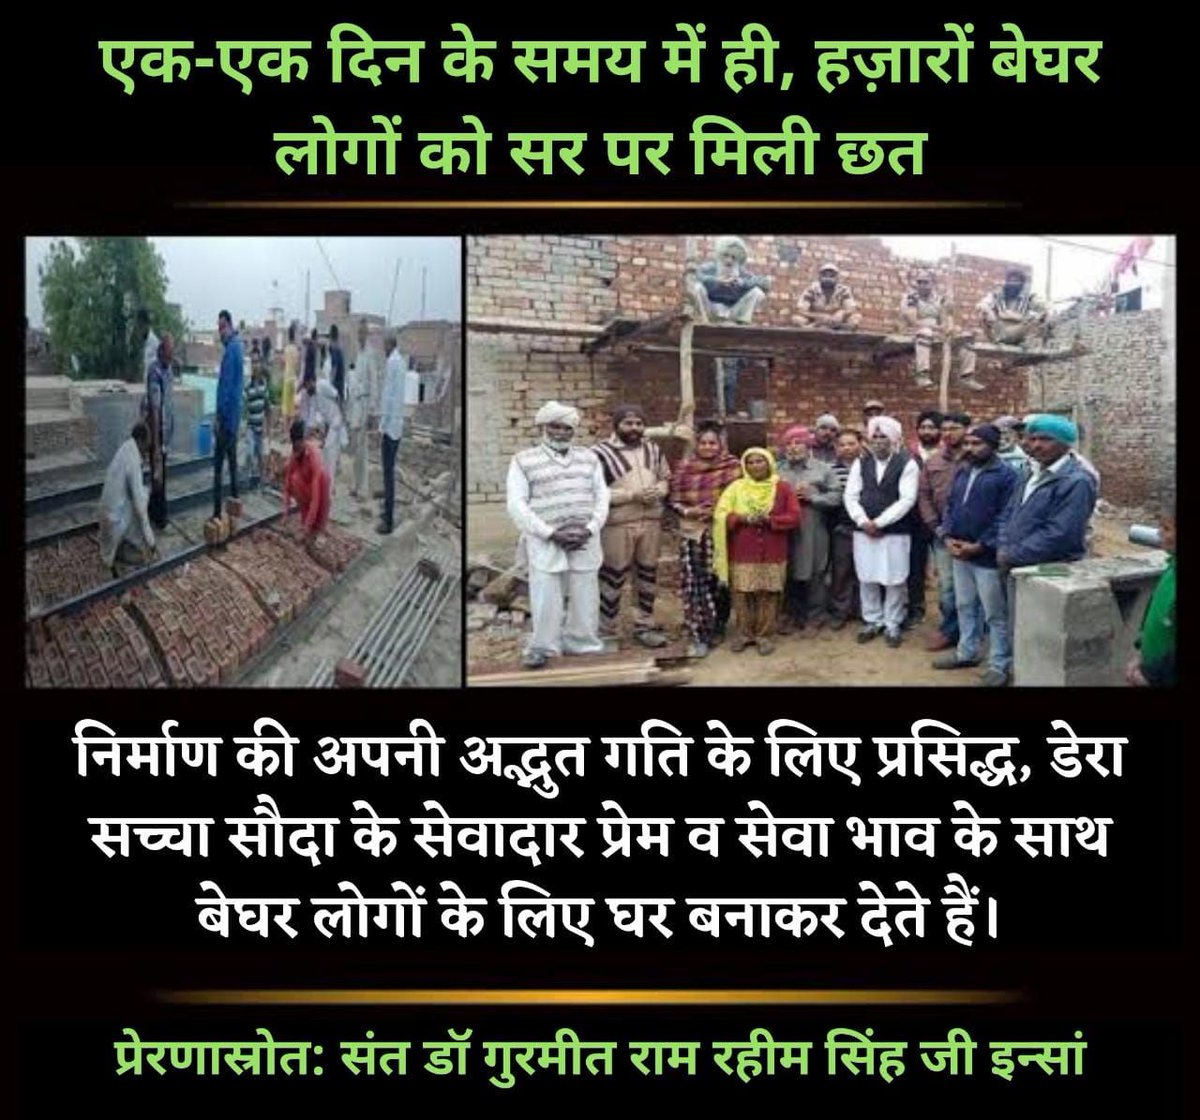 The followers of Dera Sacha Sauda build houses for poor people with their hard-earned money. #HopeForHomeless About 150 millions are homeless in the world. Till date, over 1900 homeless families have got a roof over their heads under the Ashiana campaign run by Ram Rahim Ji🙏